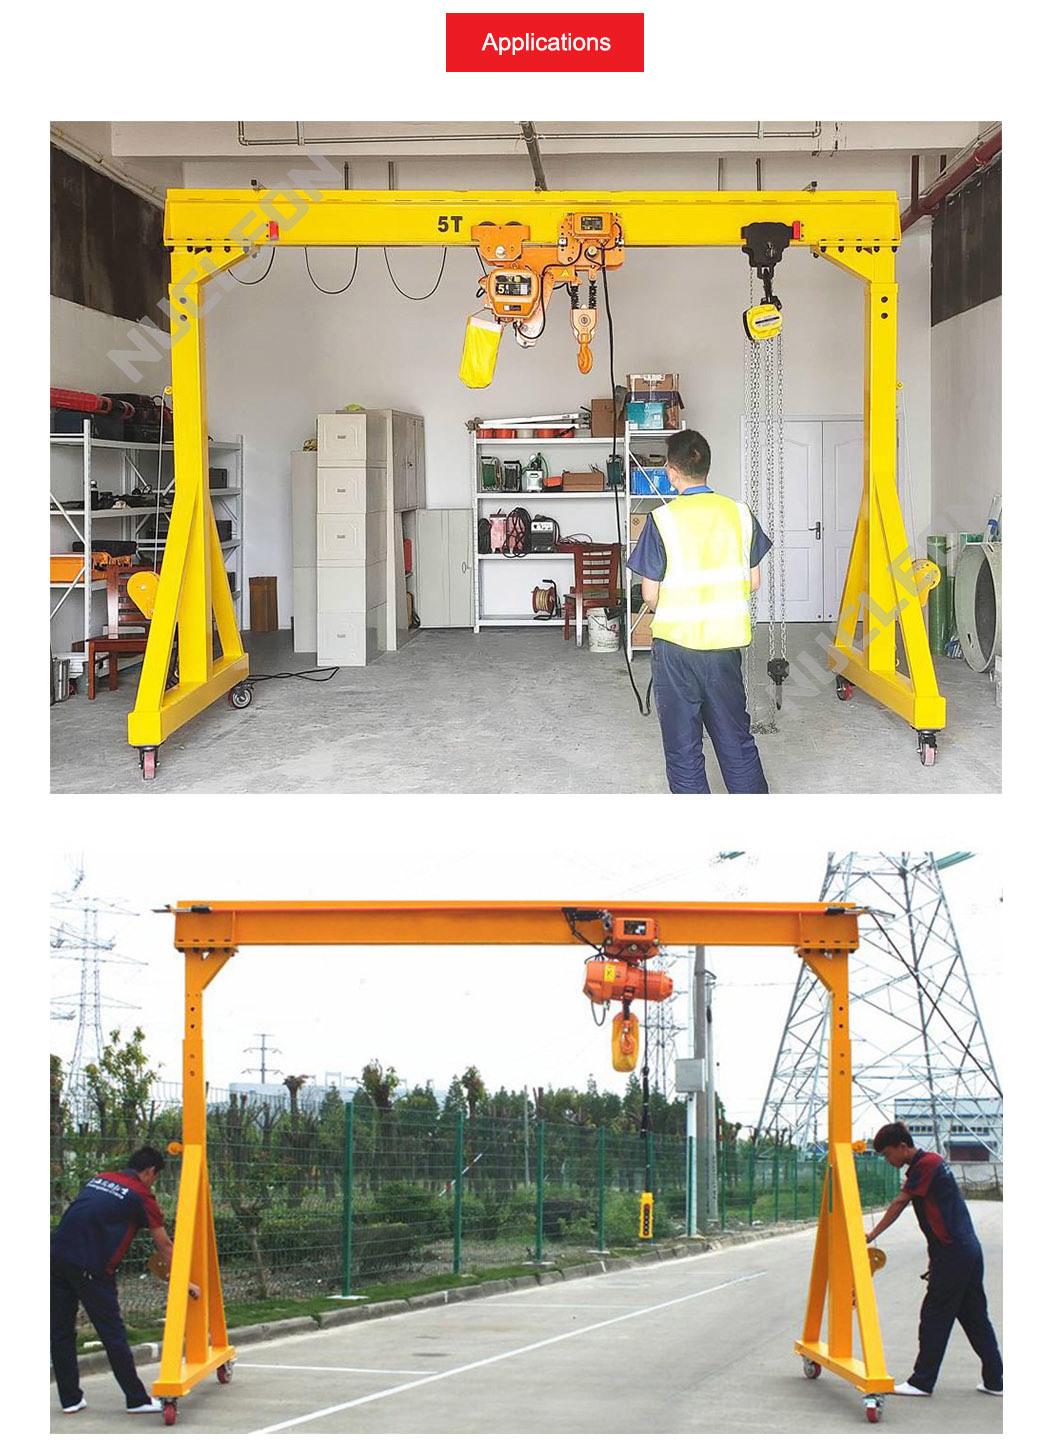 CE Certified Trackless None Rail Traveling Mobile a Frame Gantry Crane 1t for Injection Moulding